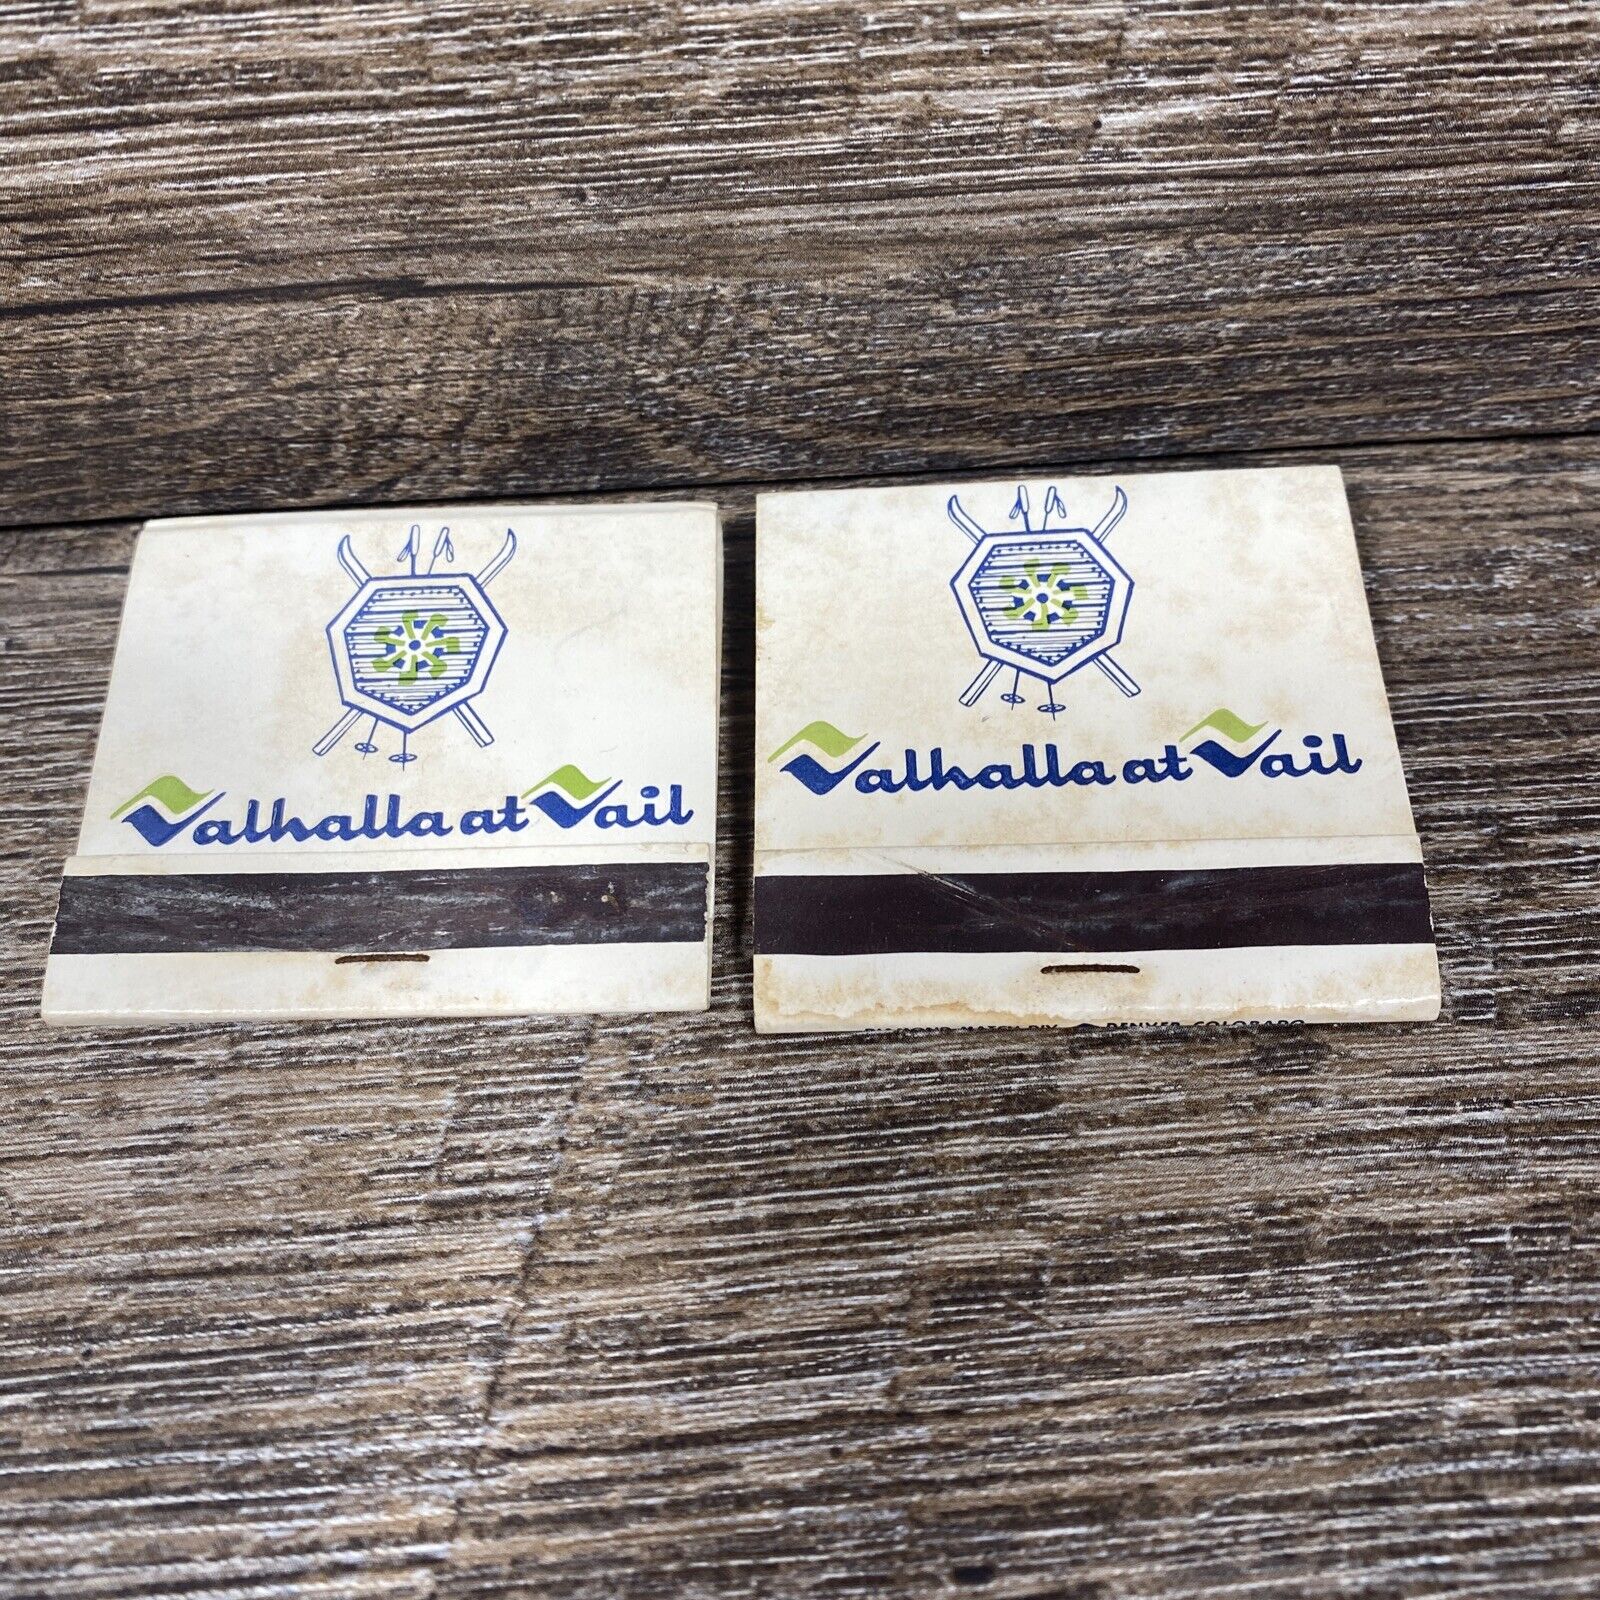 Valhalla At Vail Matchbooks Pair Used